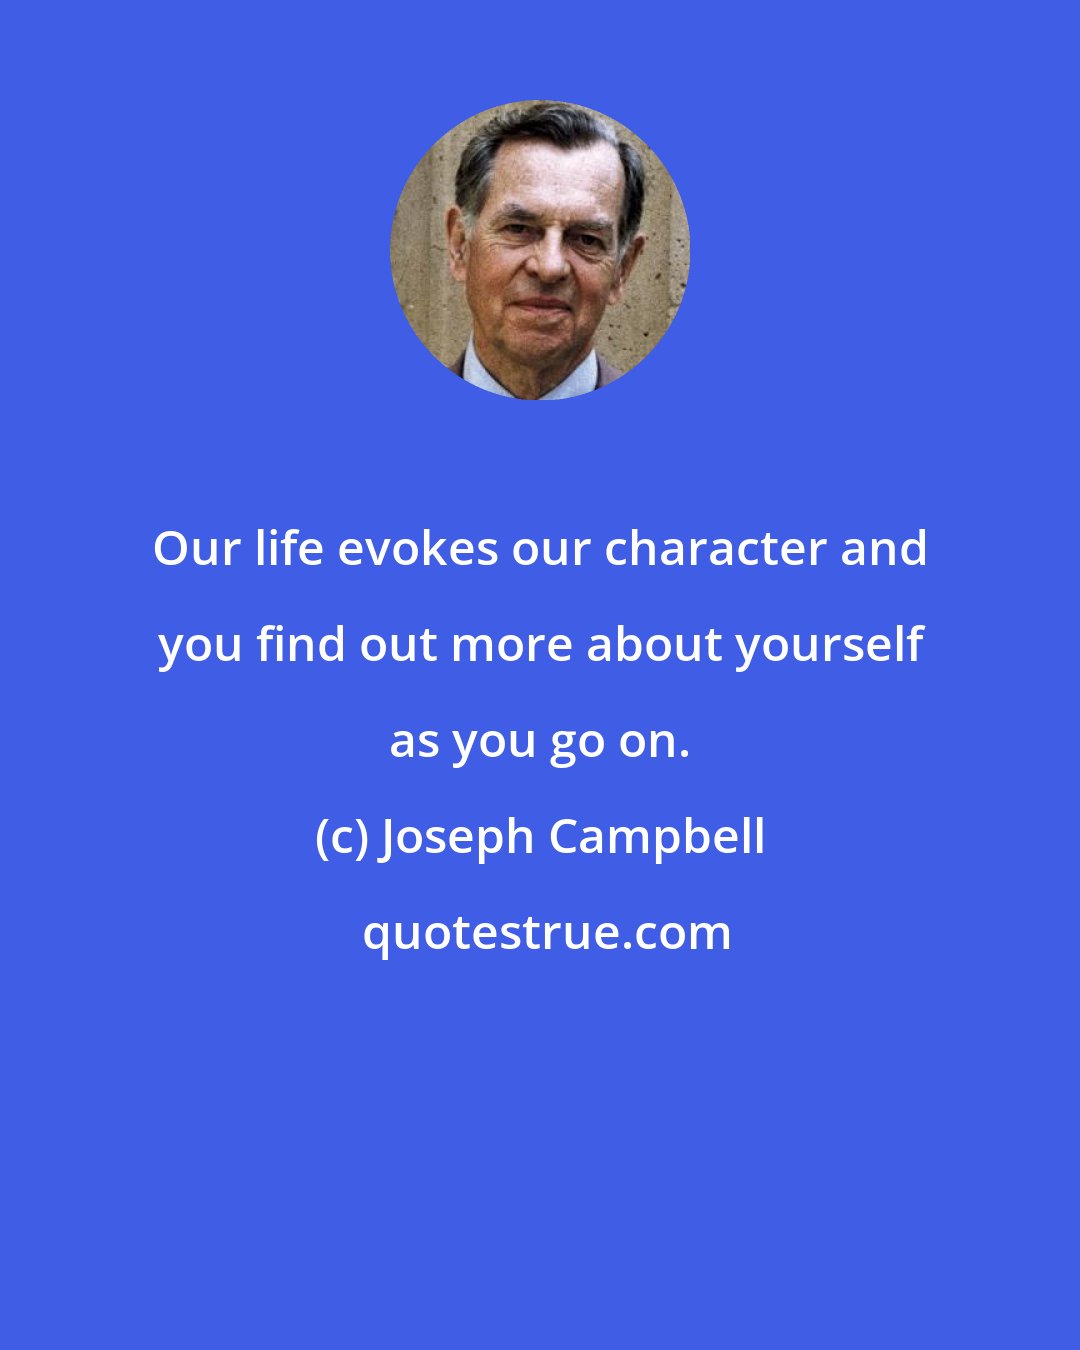 Joseph Campbell: Our life evokes our character and you find out more about yourself as you go on.